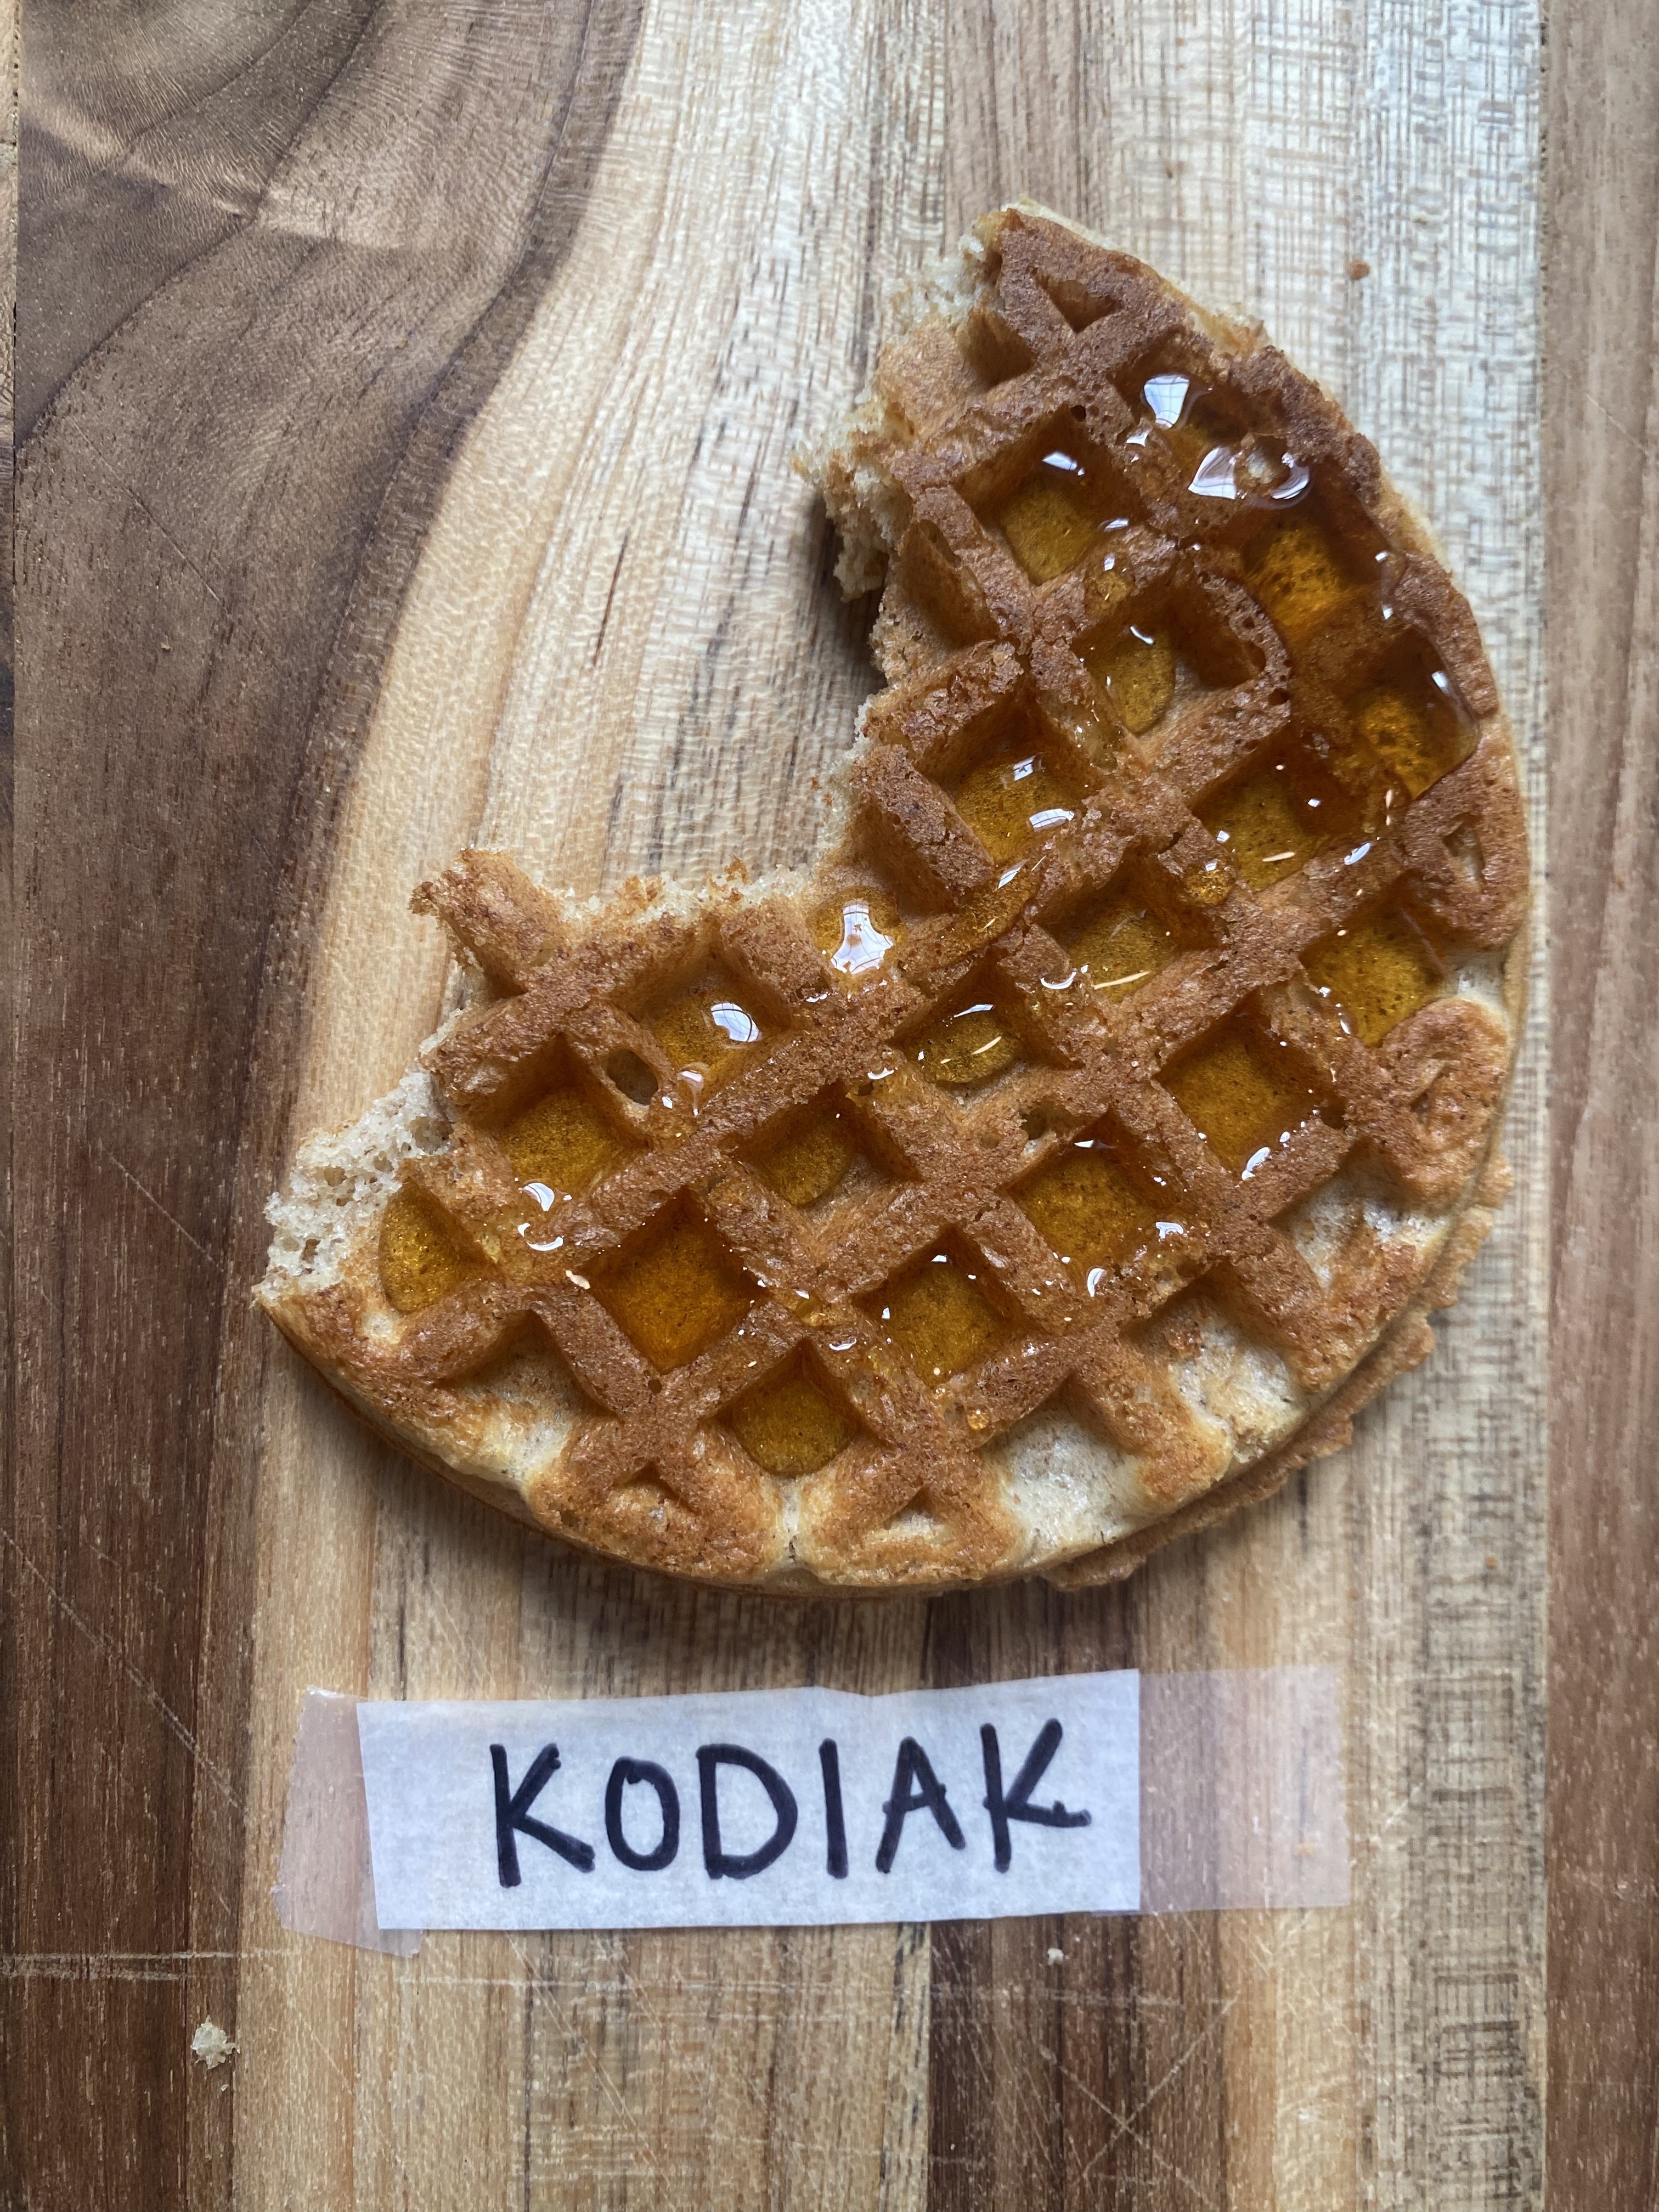 a kodiak waffle with syrup drizzled on